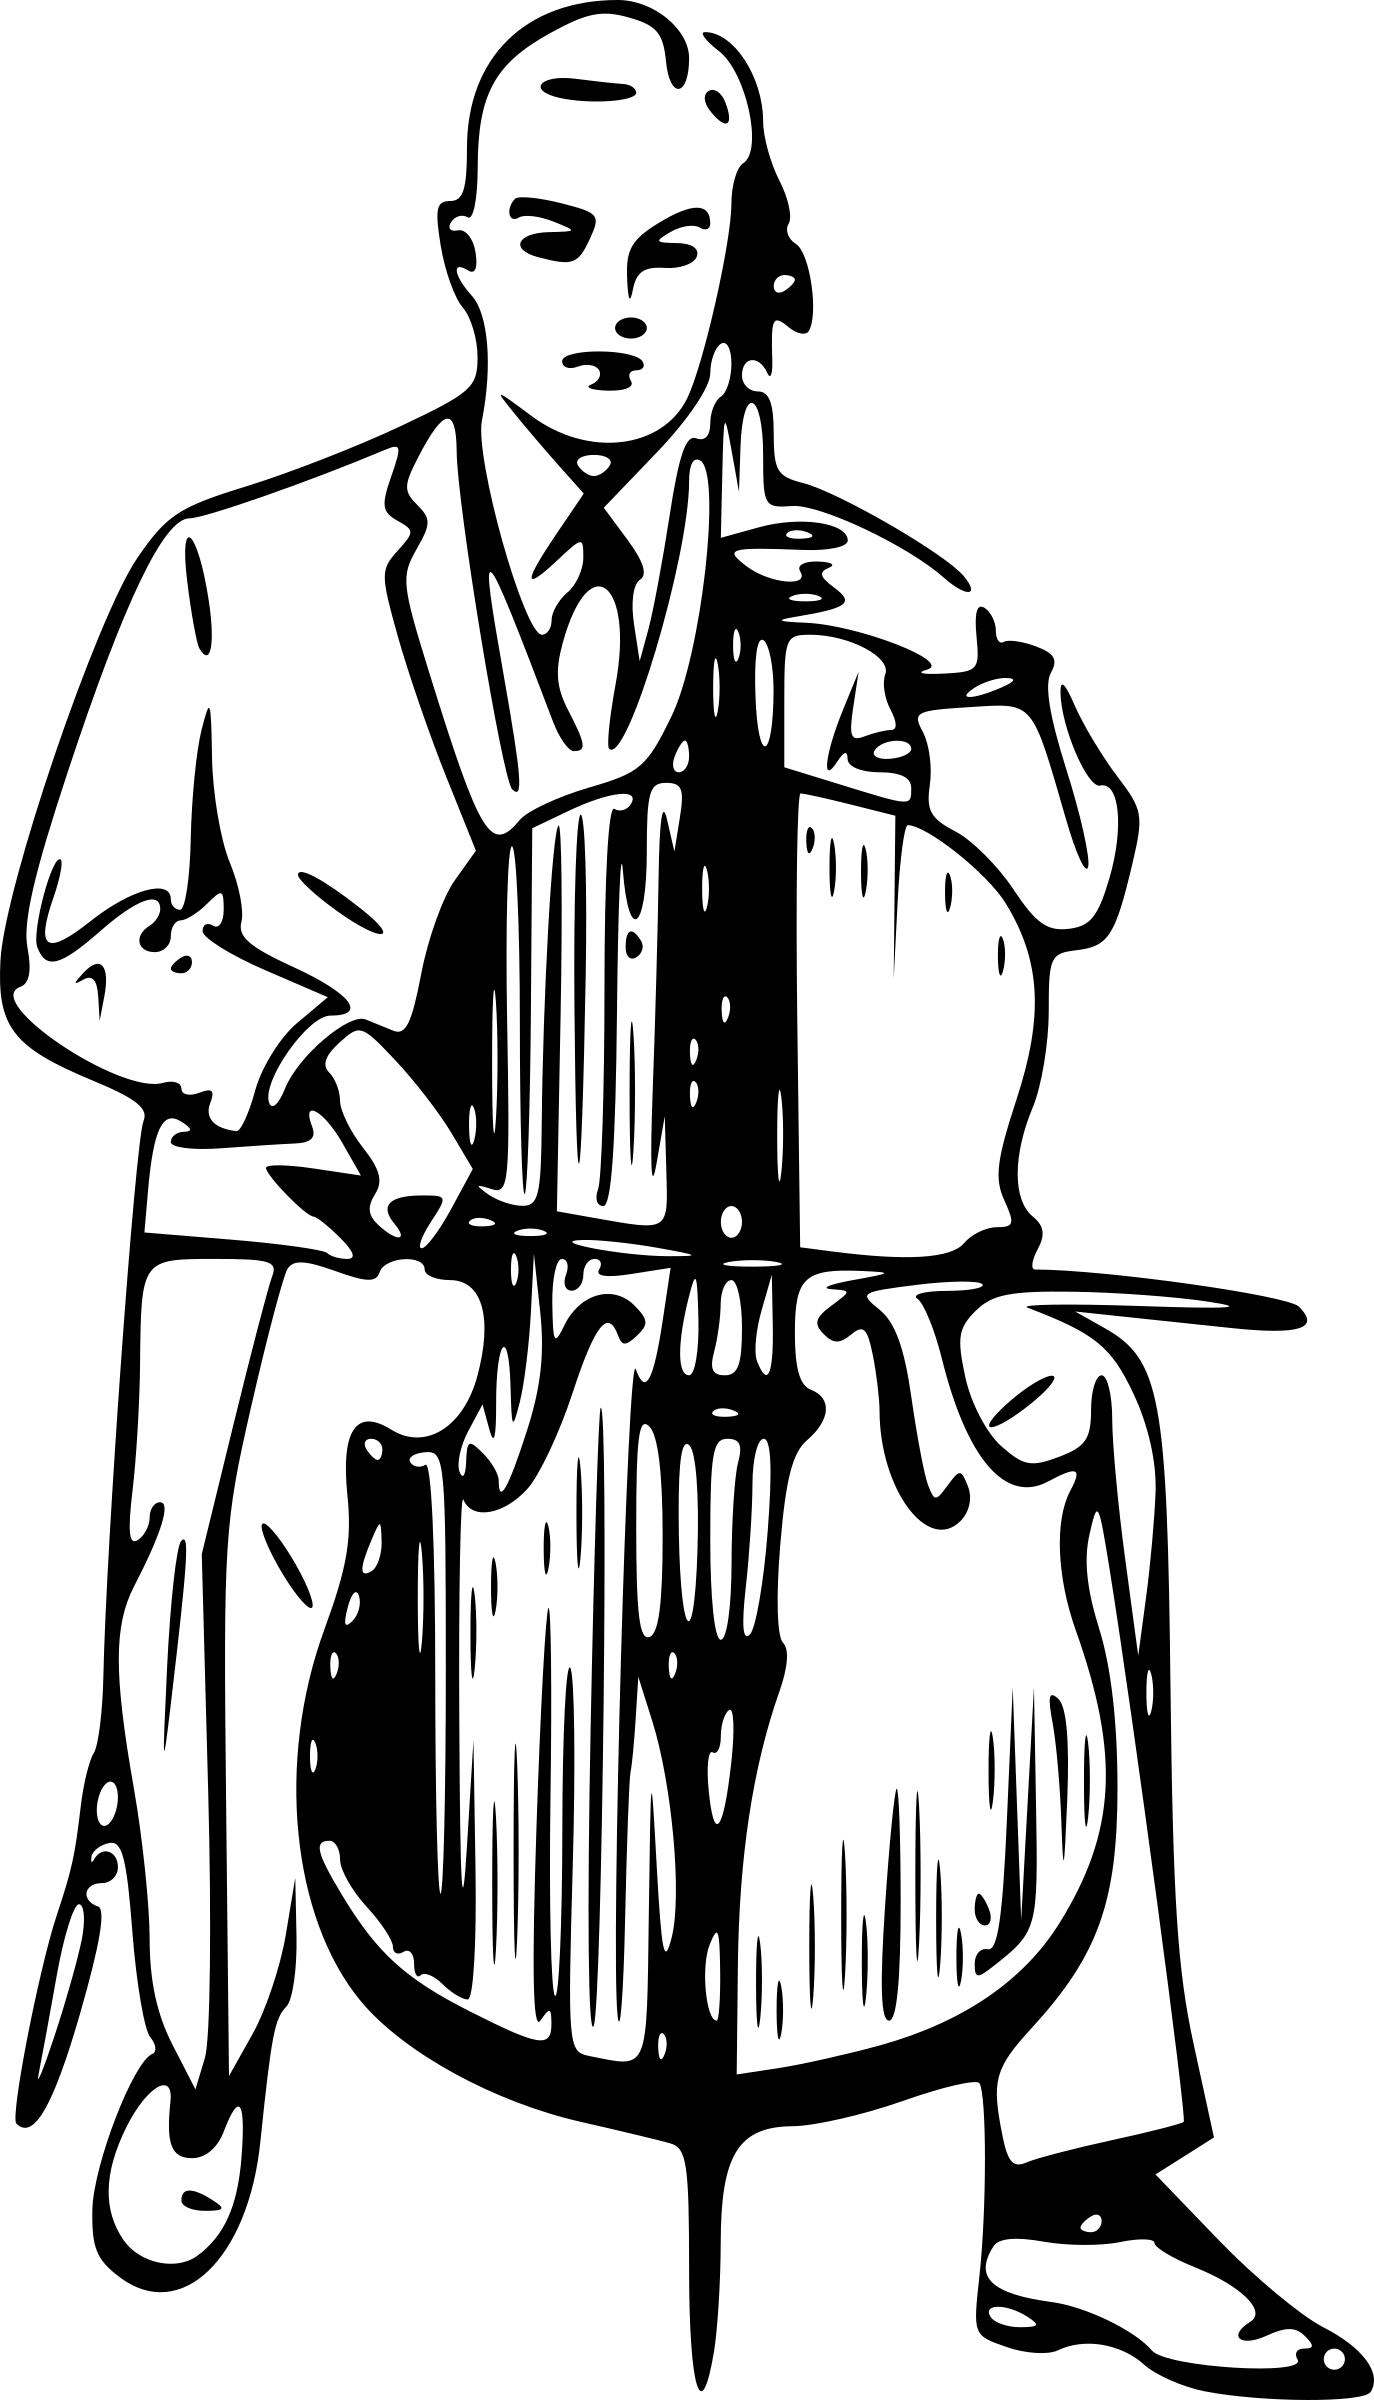 Man playing cello png